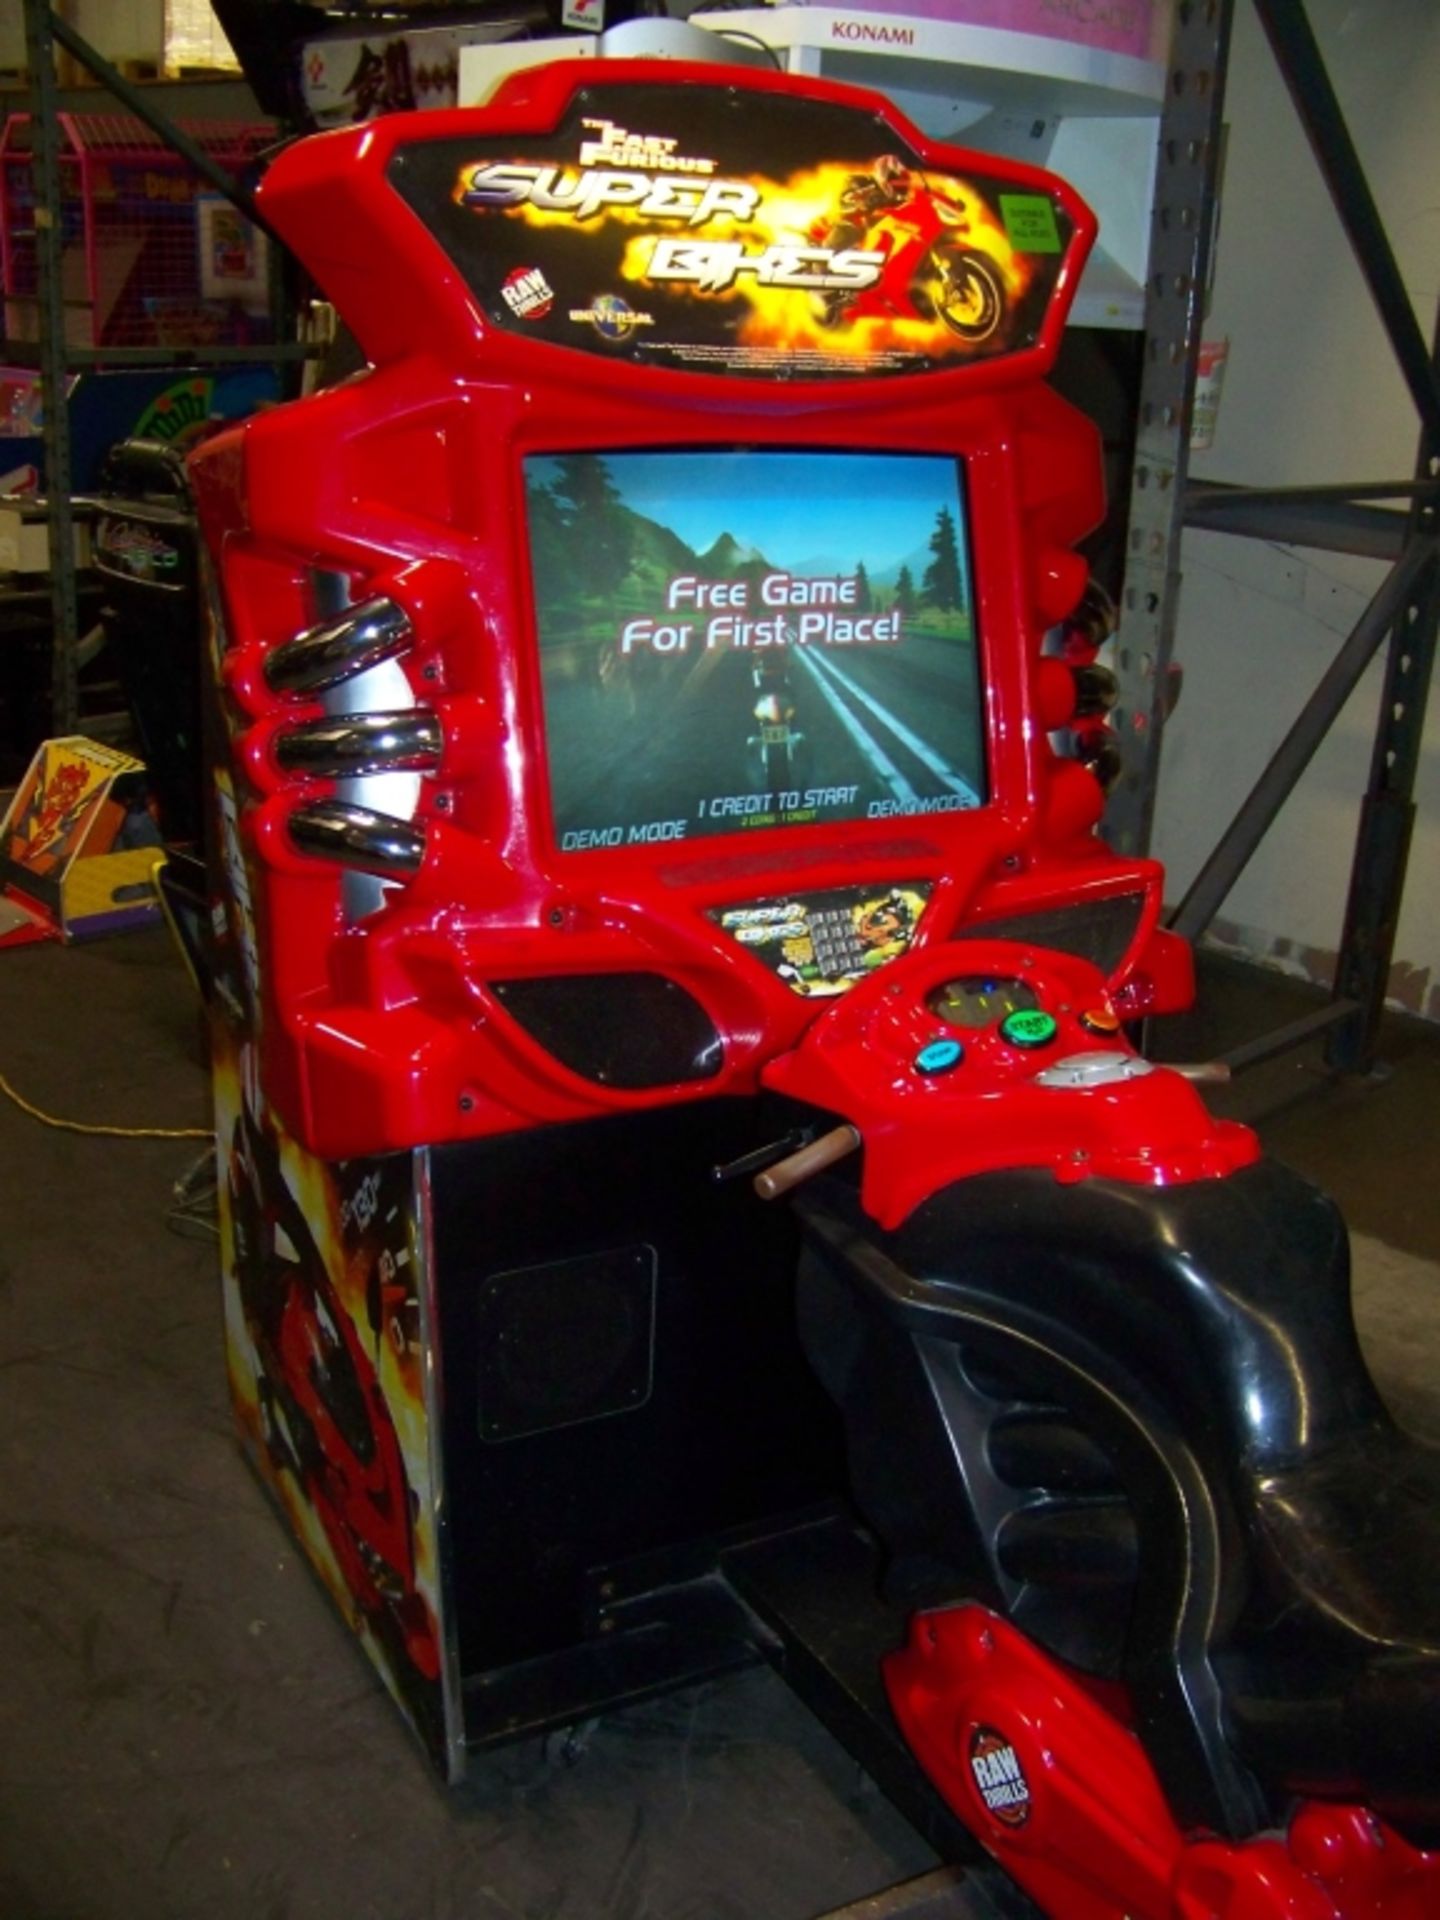 SUPER BIKES FAST AND FURIOUS RACING ARCADE GAME - Image 4 of 6